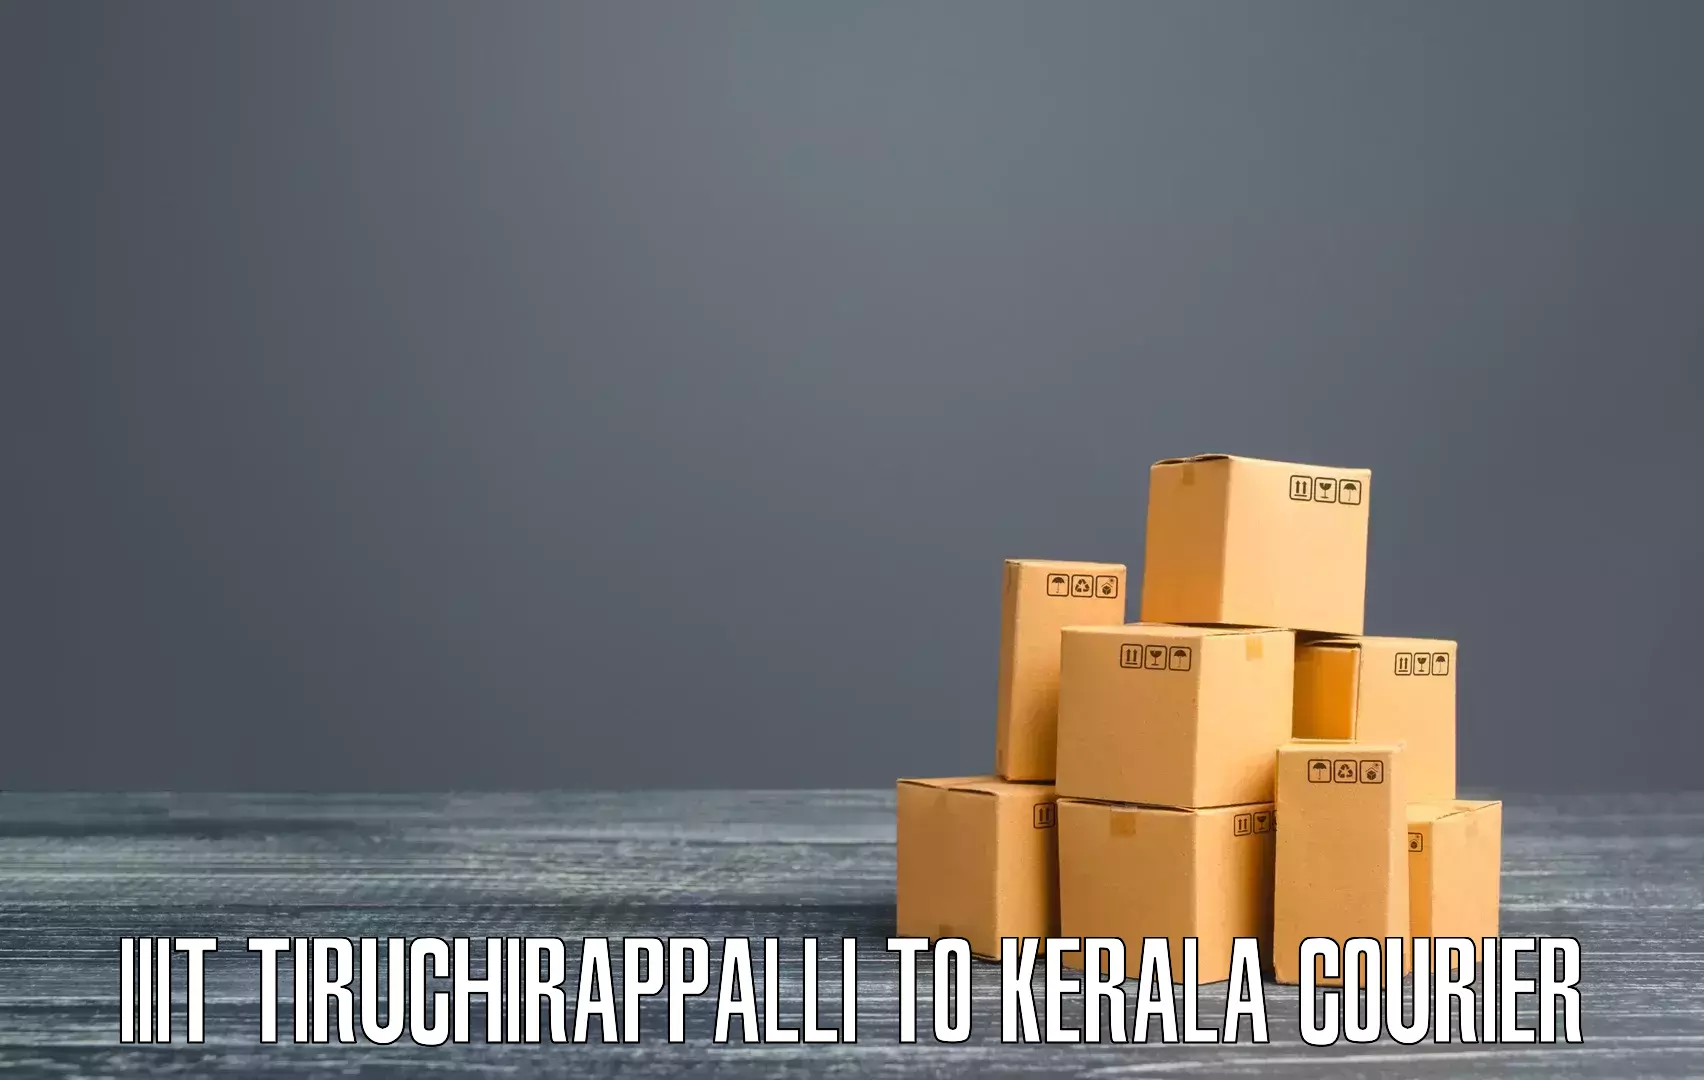 Expedited parcel delivery IIIT Tiruchirappalli to Kerala